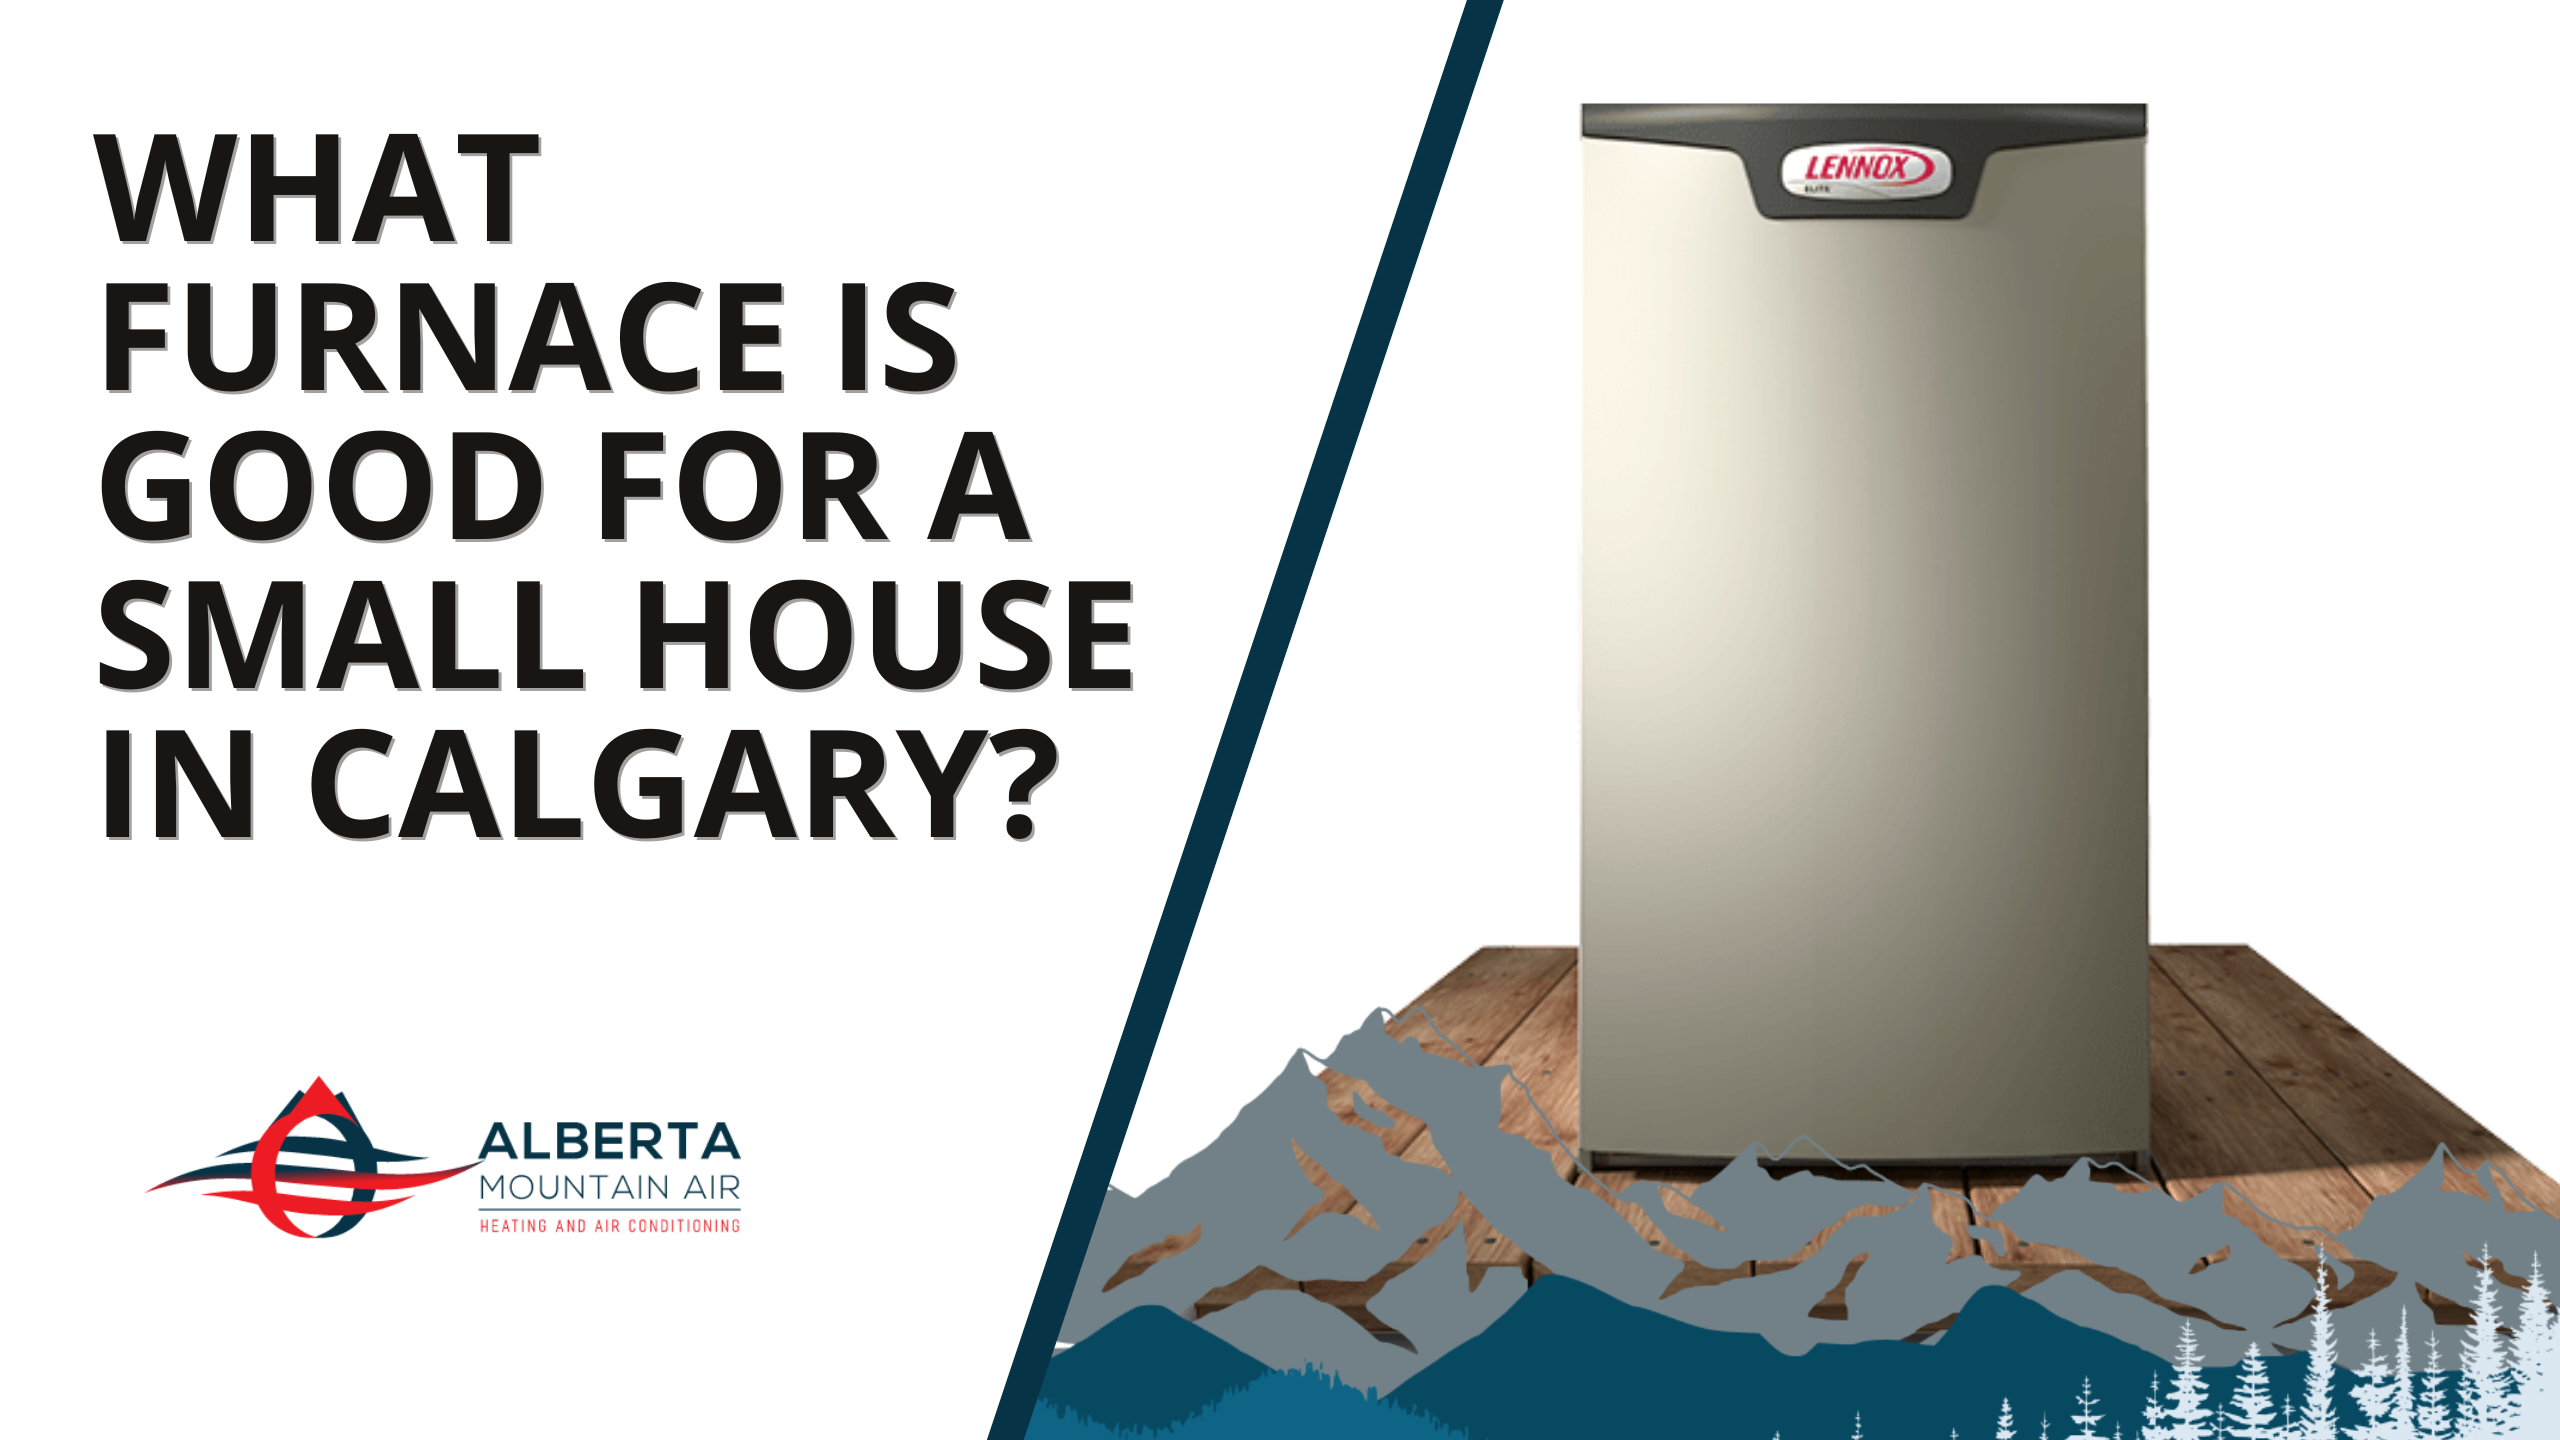 What Furnace is Good for a Small House in Calgary?